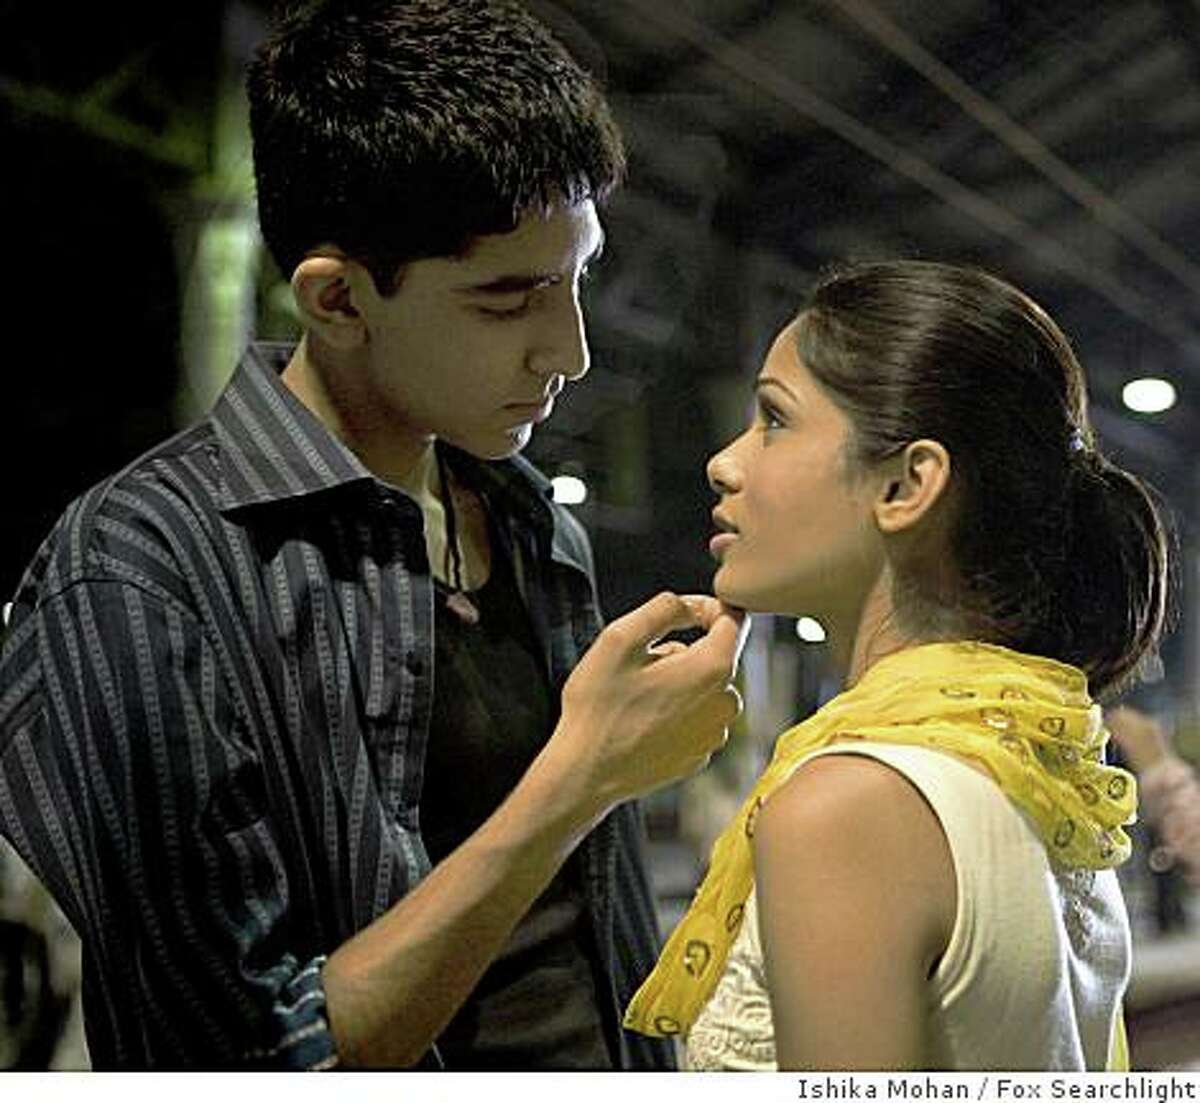 In this image released by Fox Searchlight pictures, Dev Patel, left, and Freida Pinto are shown in a scene from "Slumdog Millionaire."